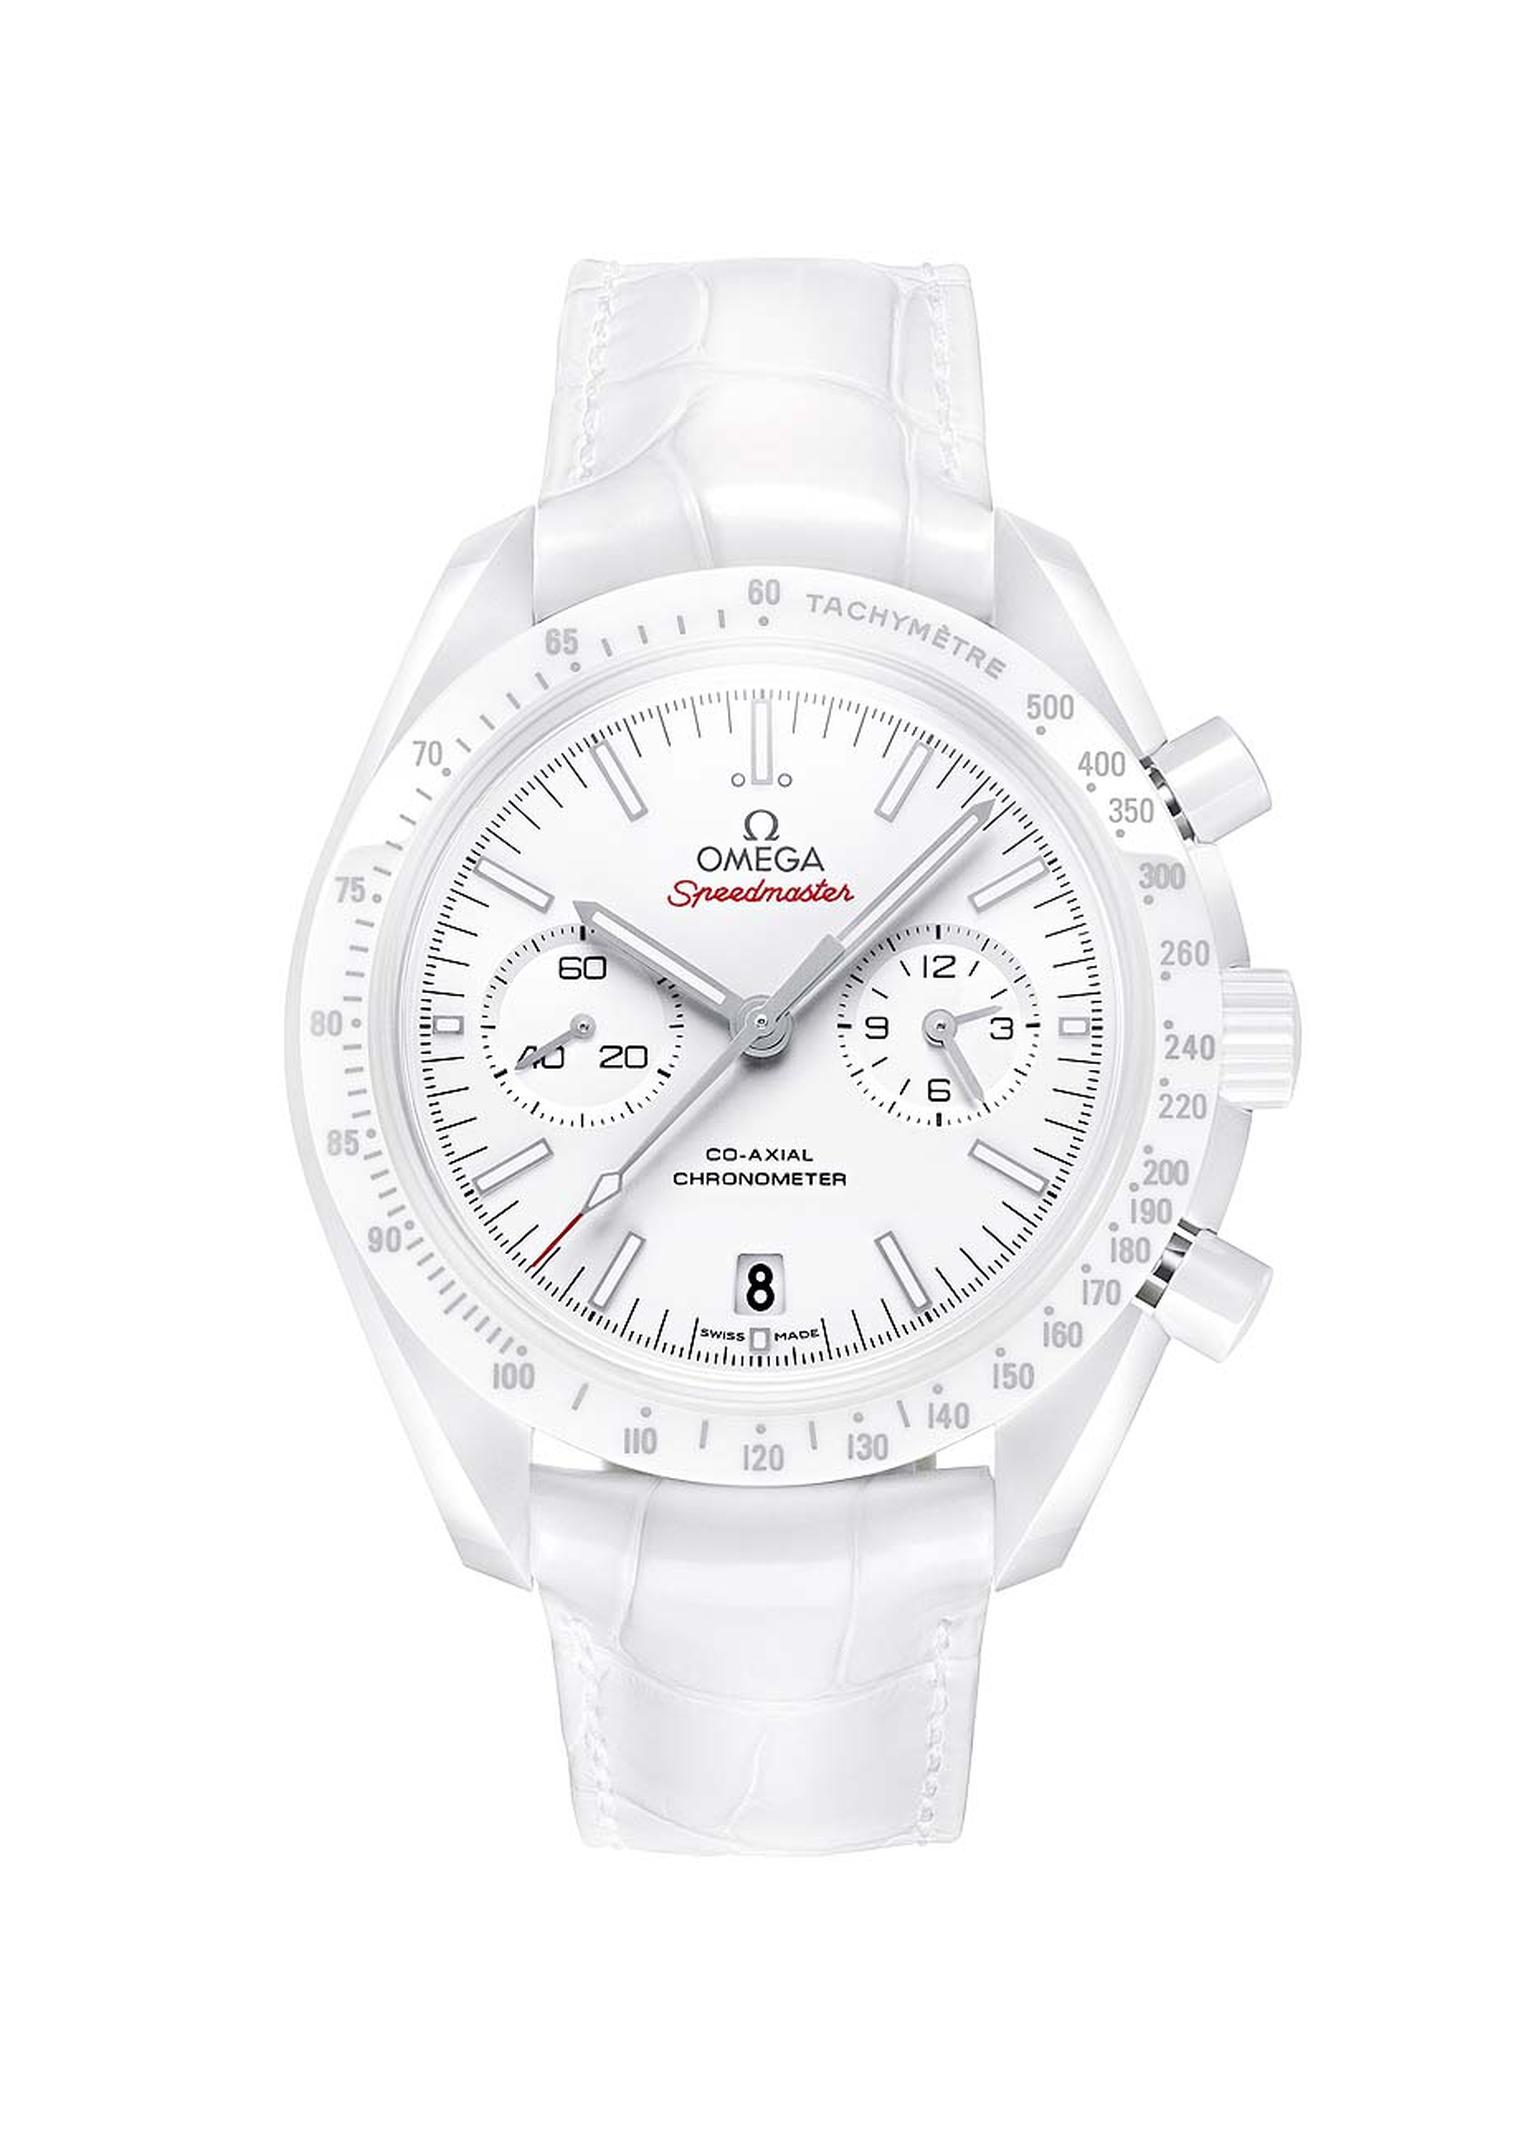 Basel watches_Omega Moonwatch_white_front.jpg